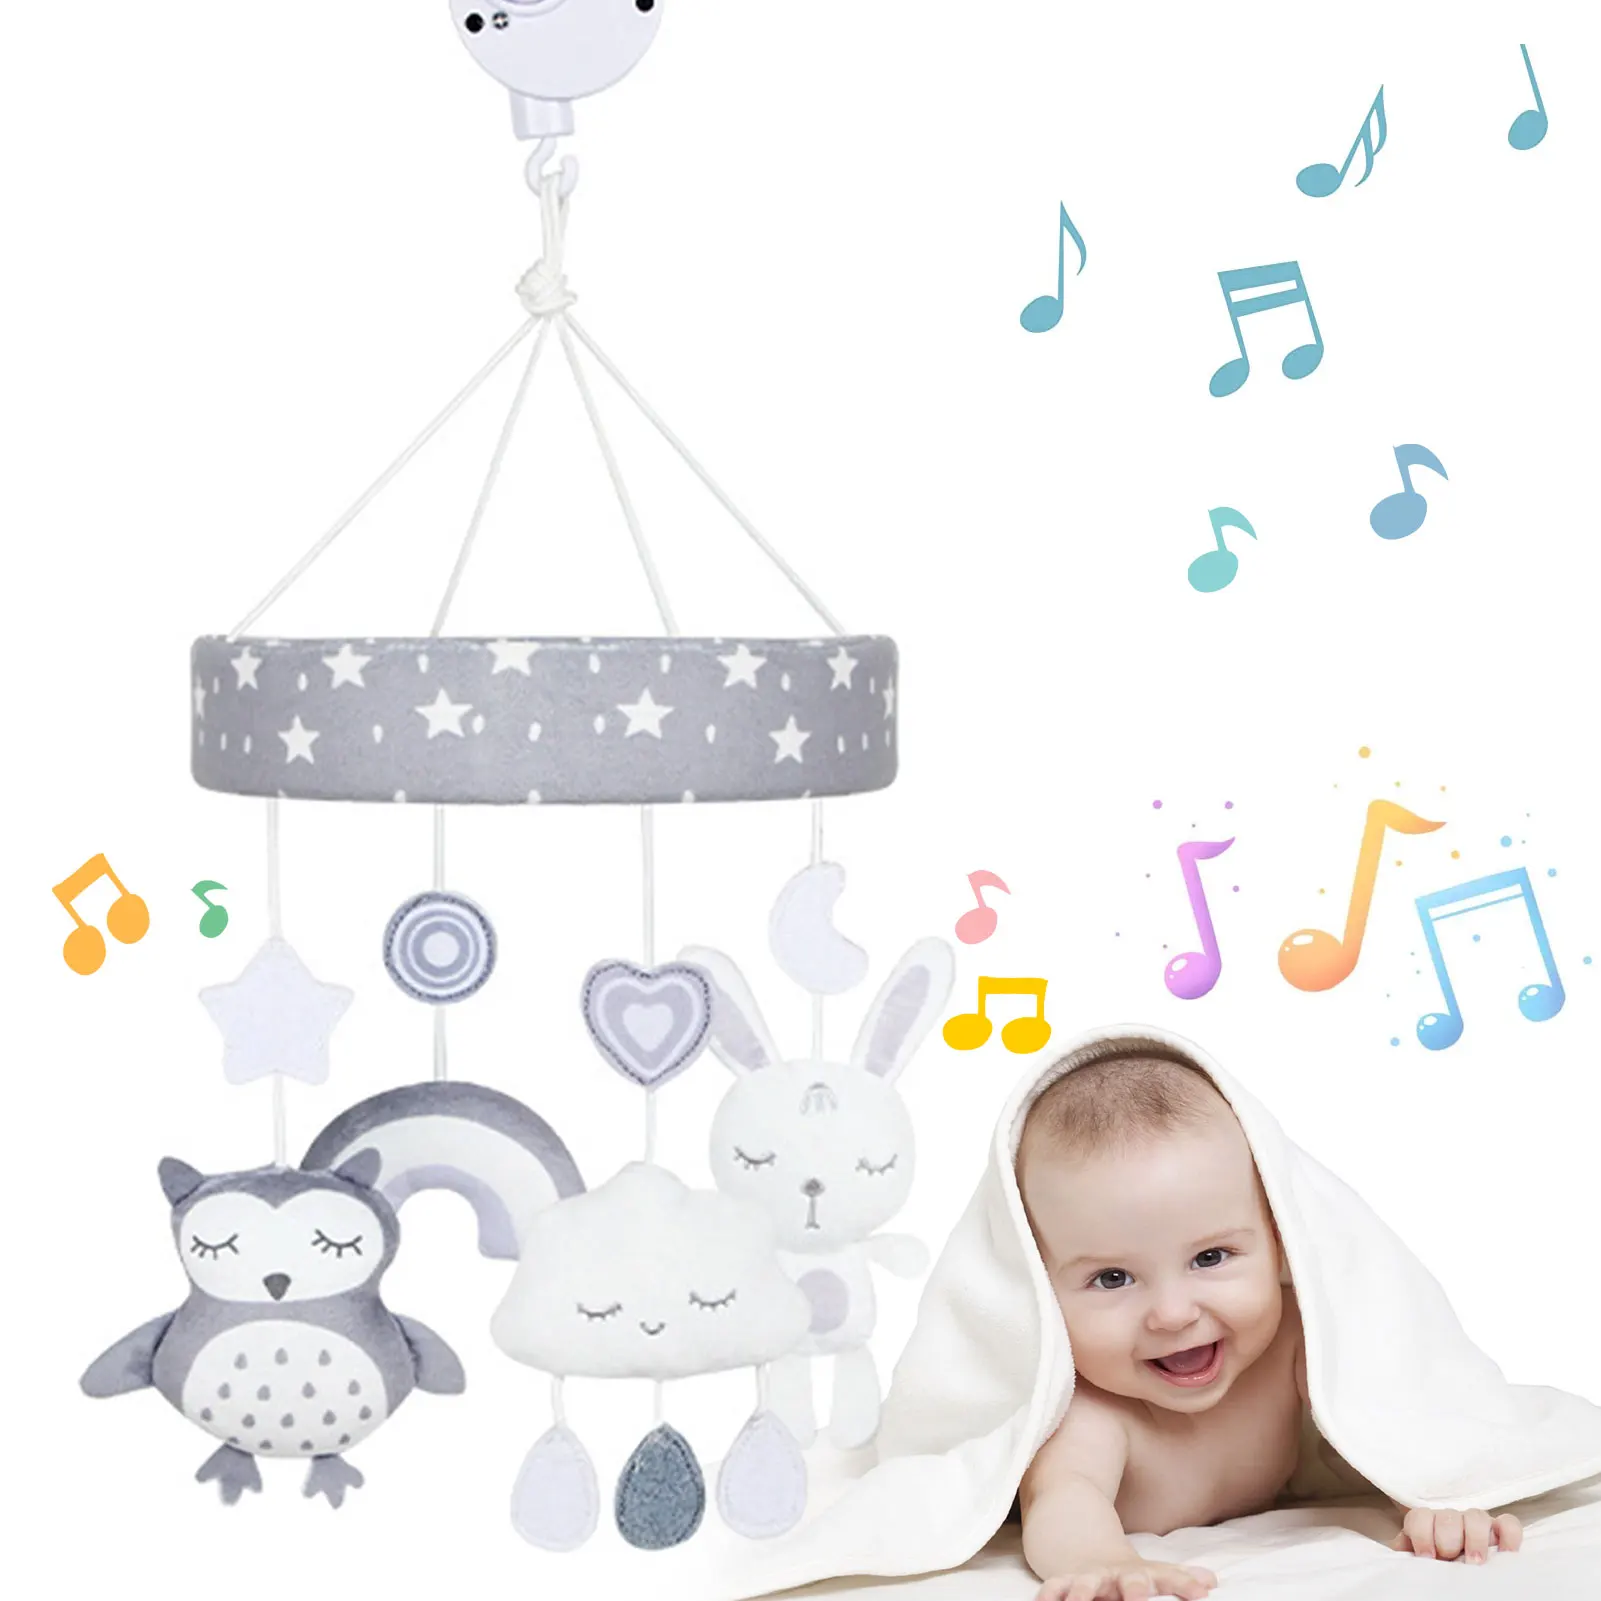 

Baby Crib Mobile Baby Mobiles For Cribs Infant Bed Pendant Decoration Crib Accessories Built-In Music Box Designed For Newborns